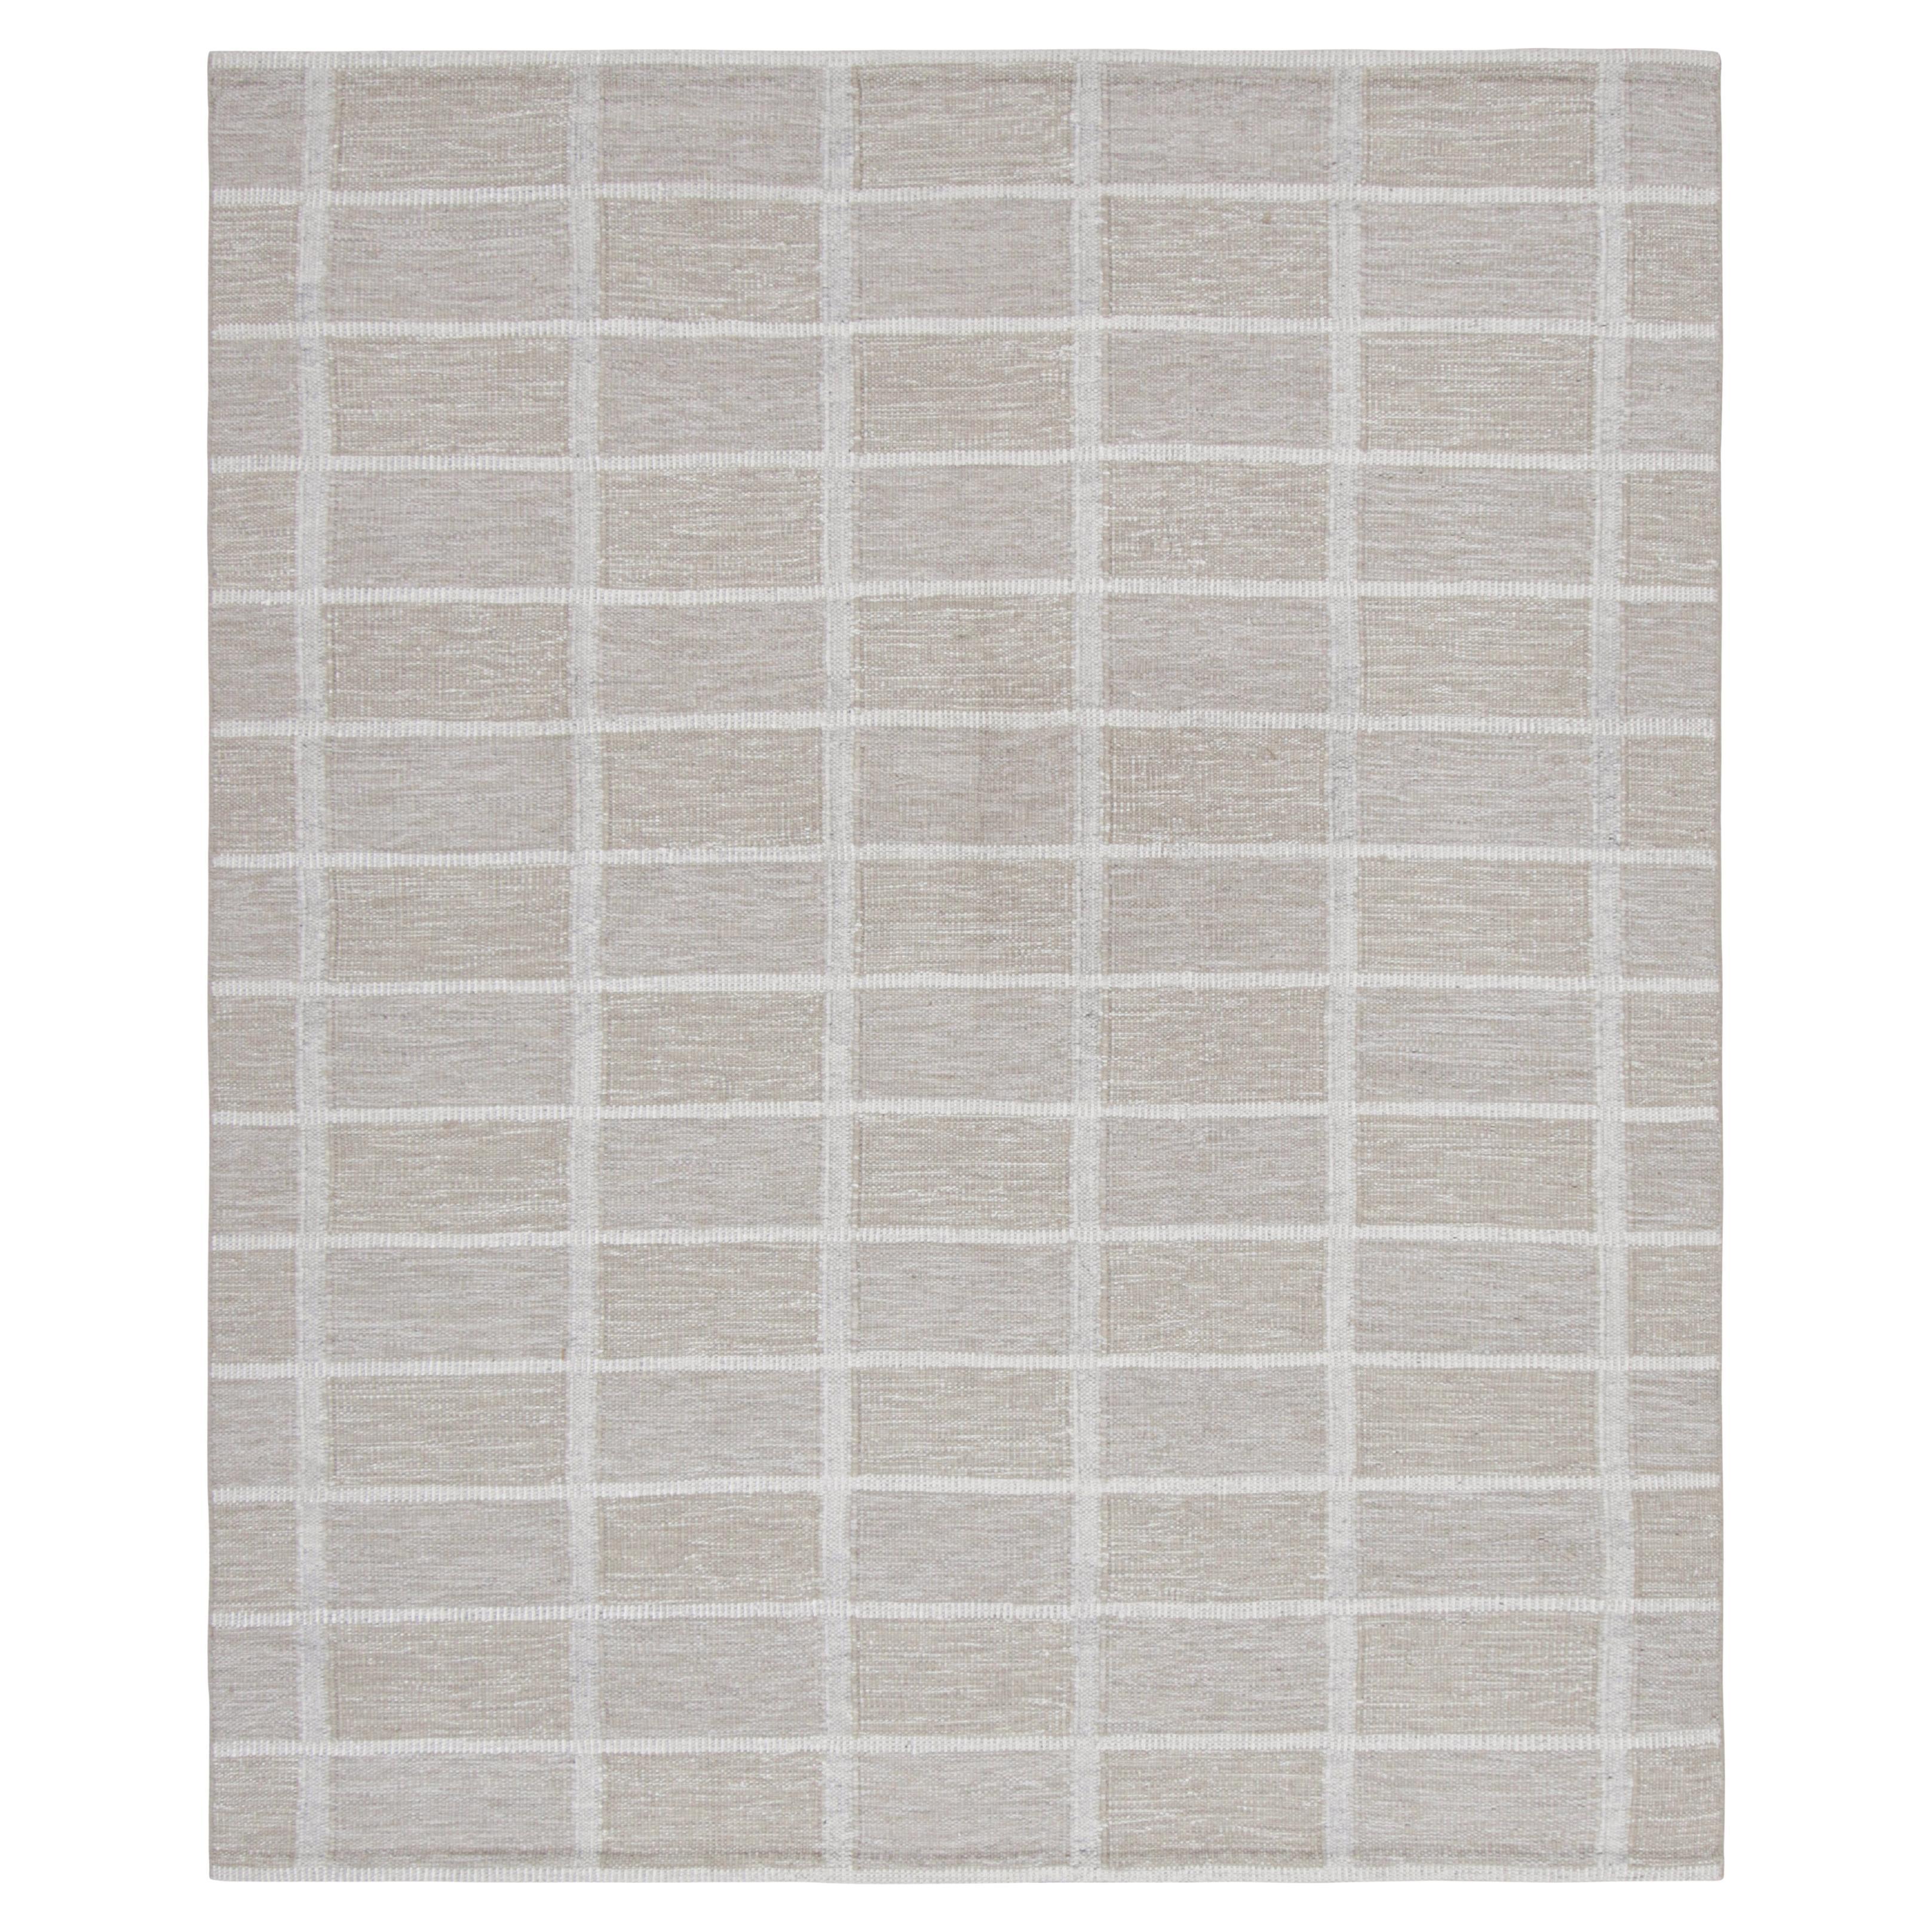 Rug & Kilim’s Scandinavian Style Rug in Beige with Gray and White Grid Patterns For Sale